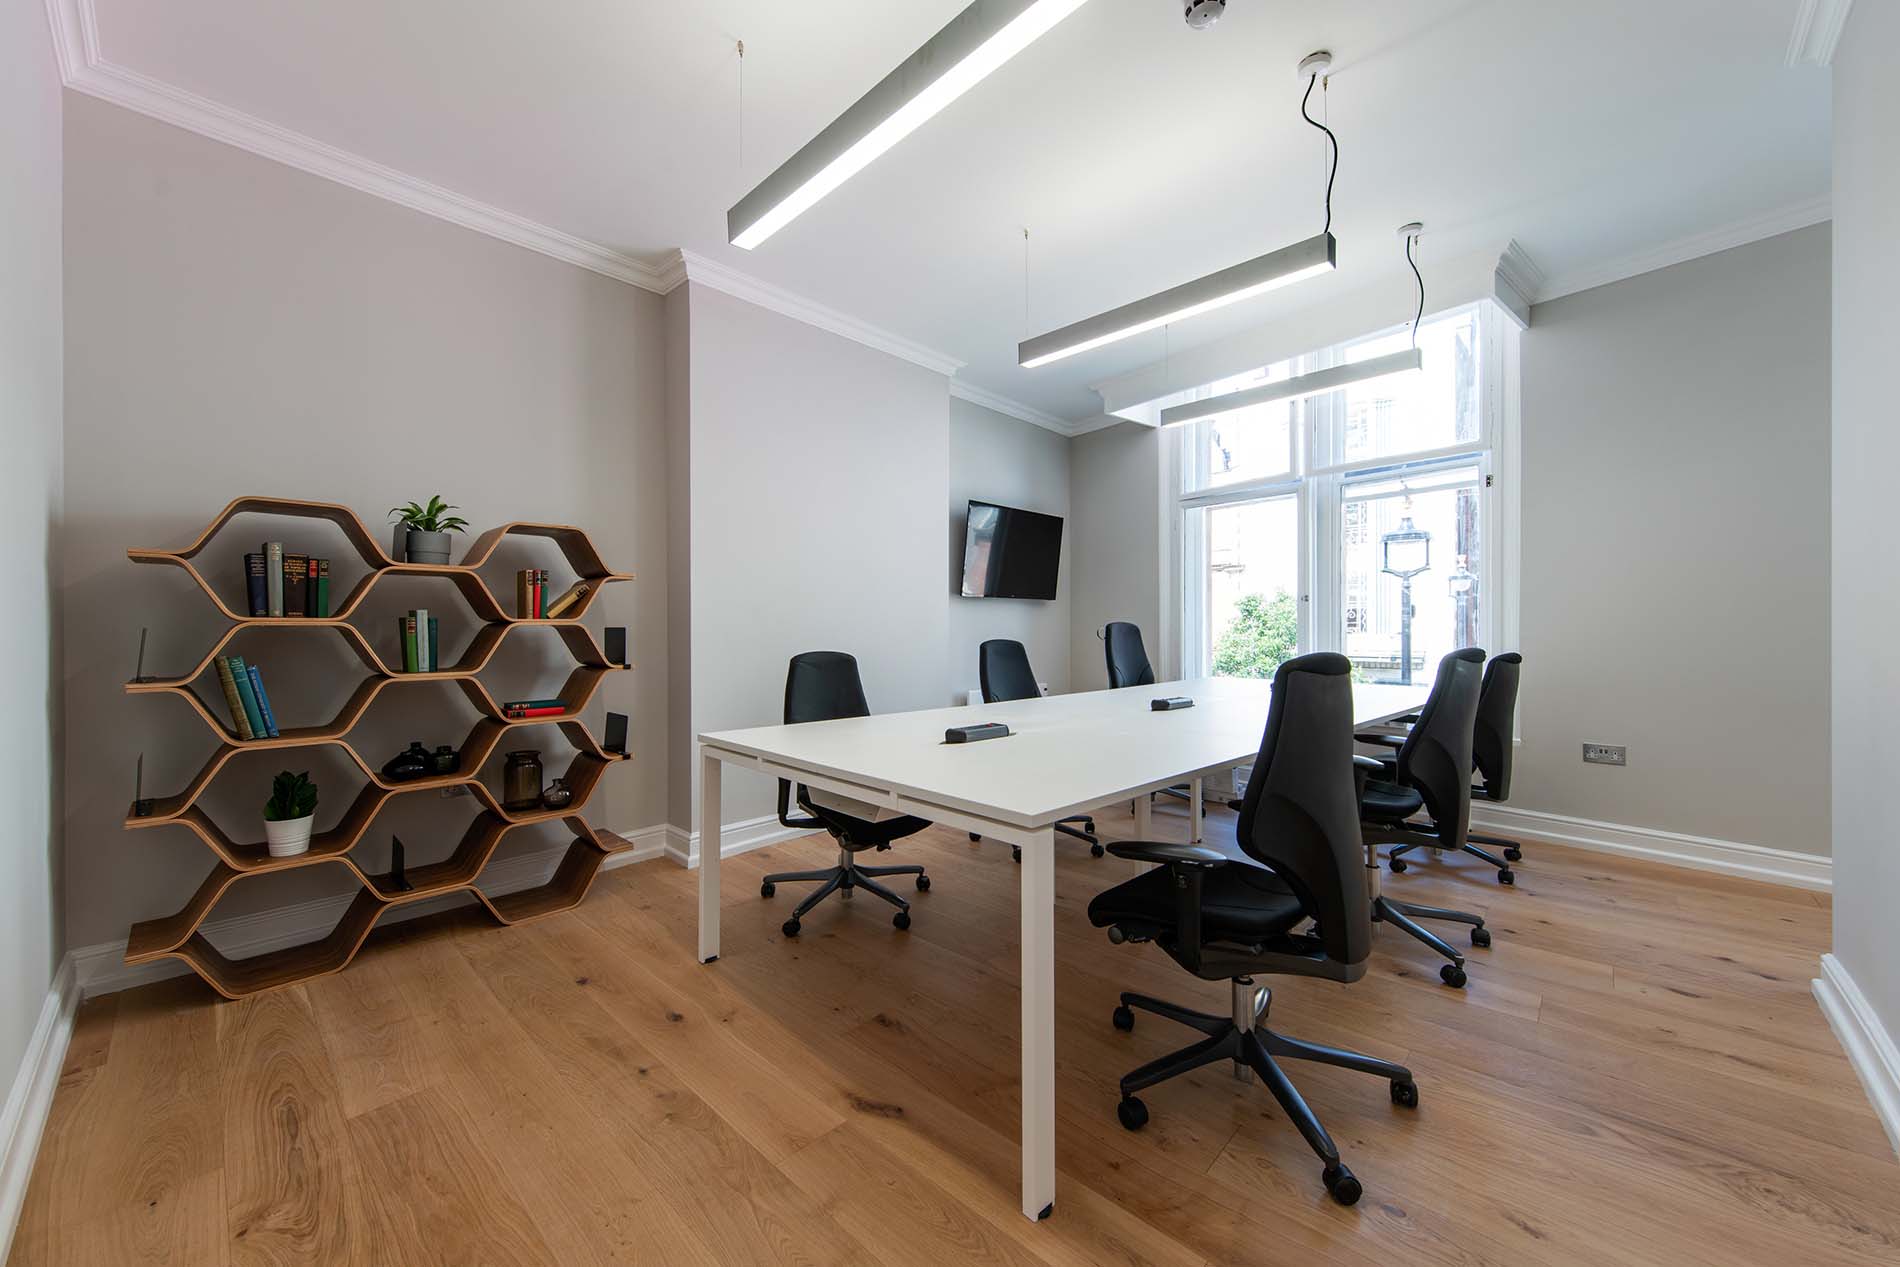 Hybrid working with small office spaces in London